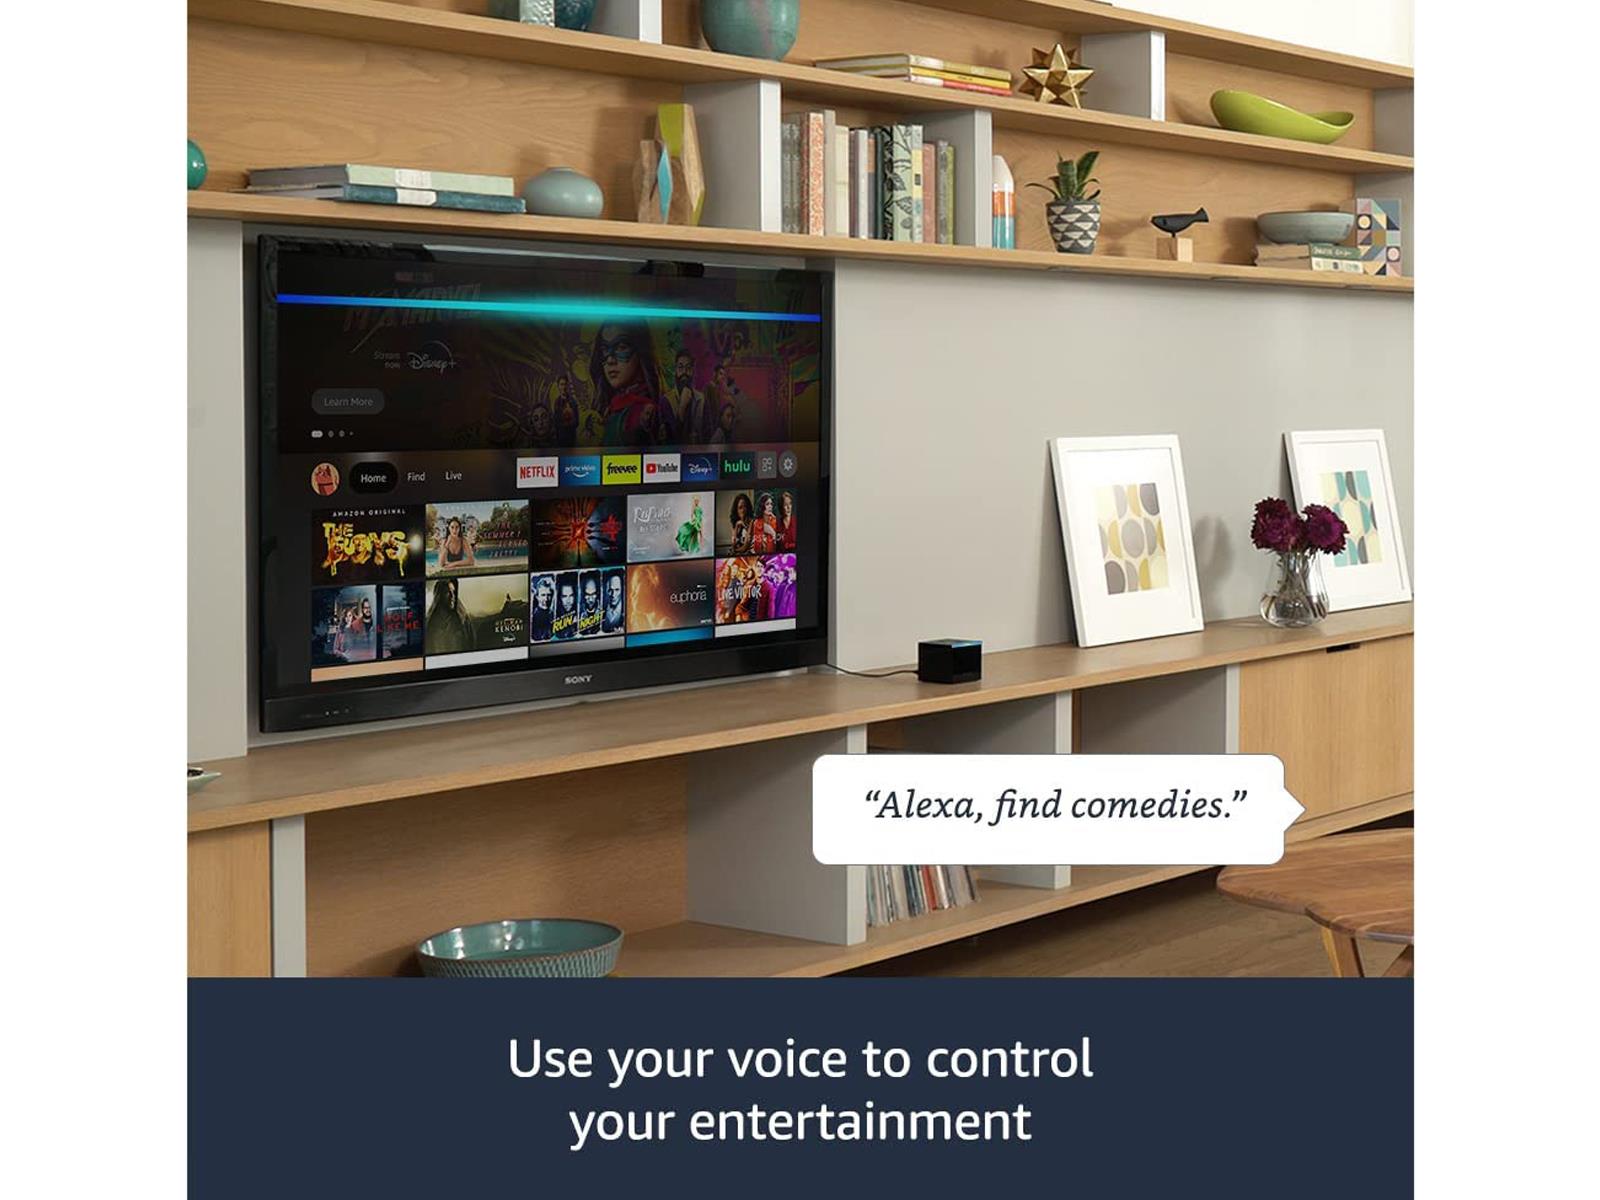 Image shows the voice control feature on the Amazon Fire TV Cube